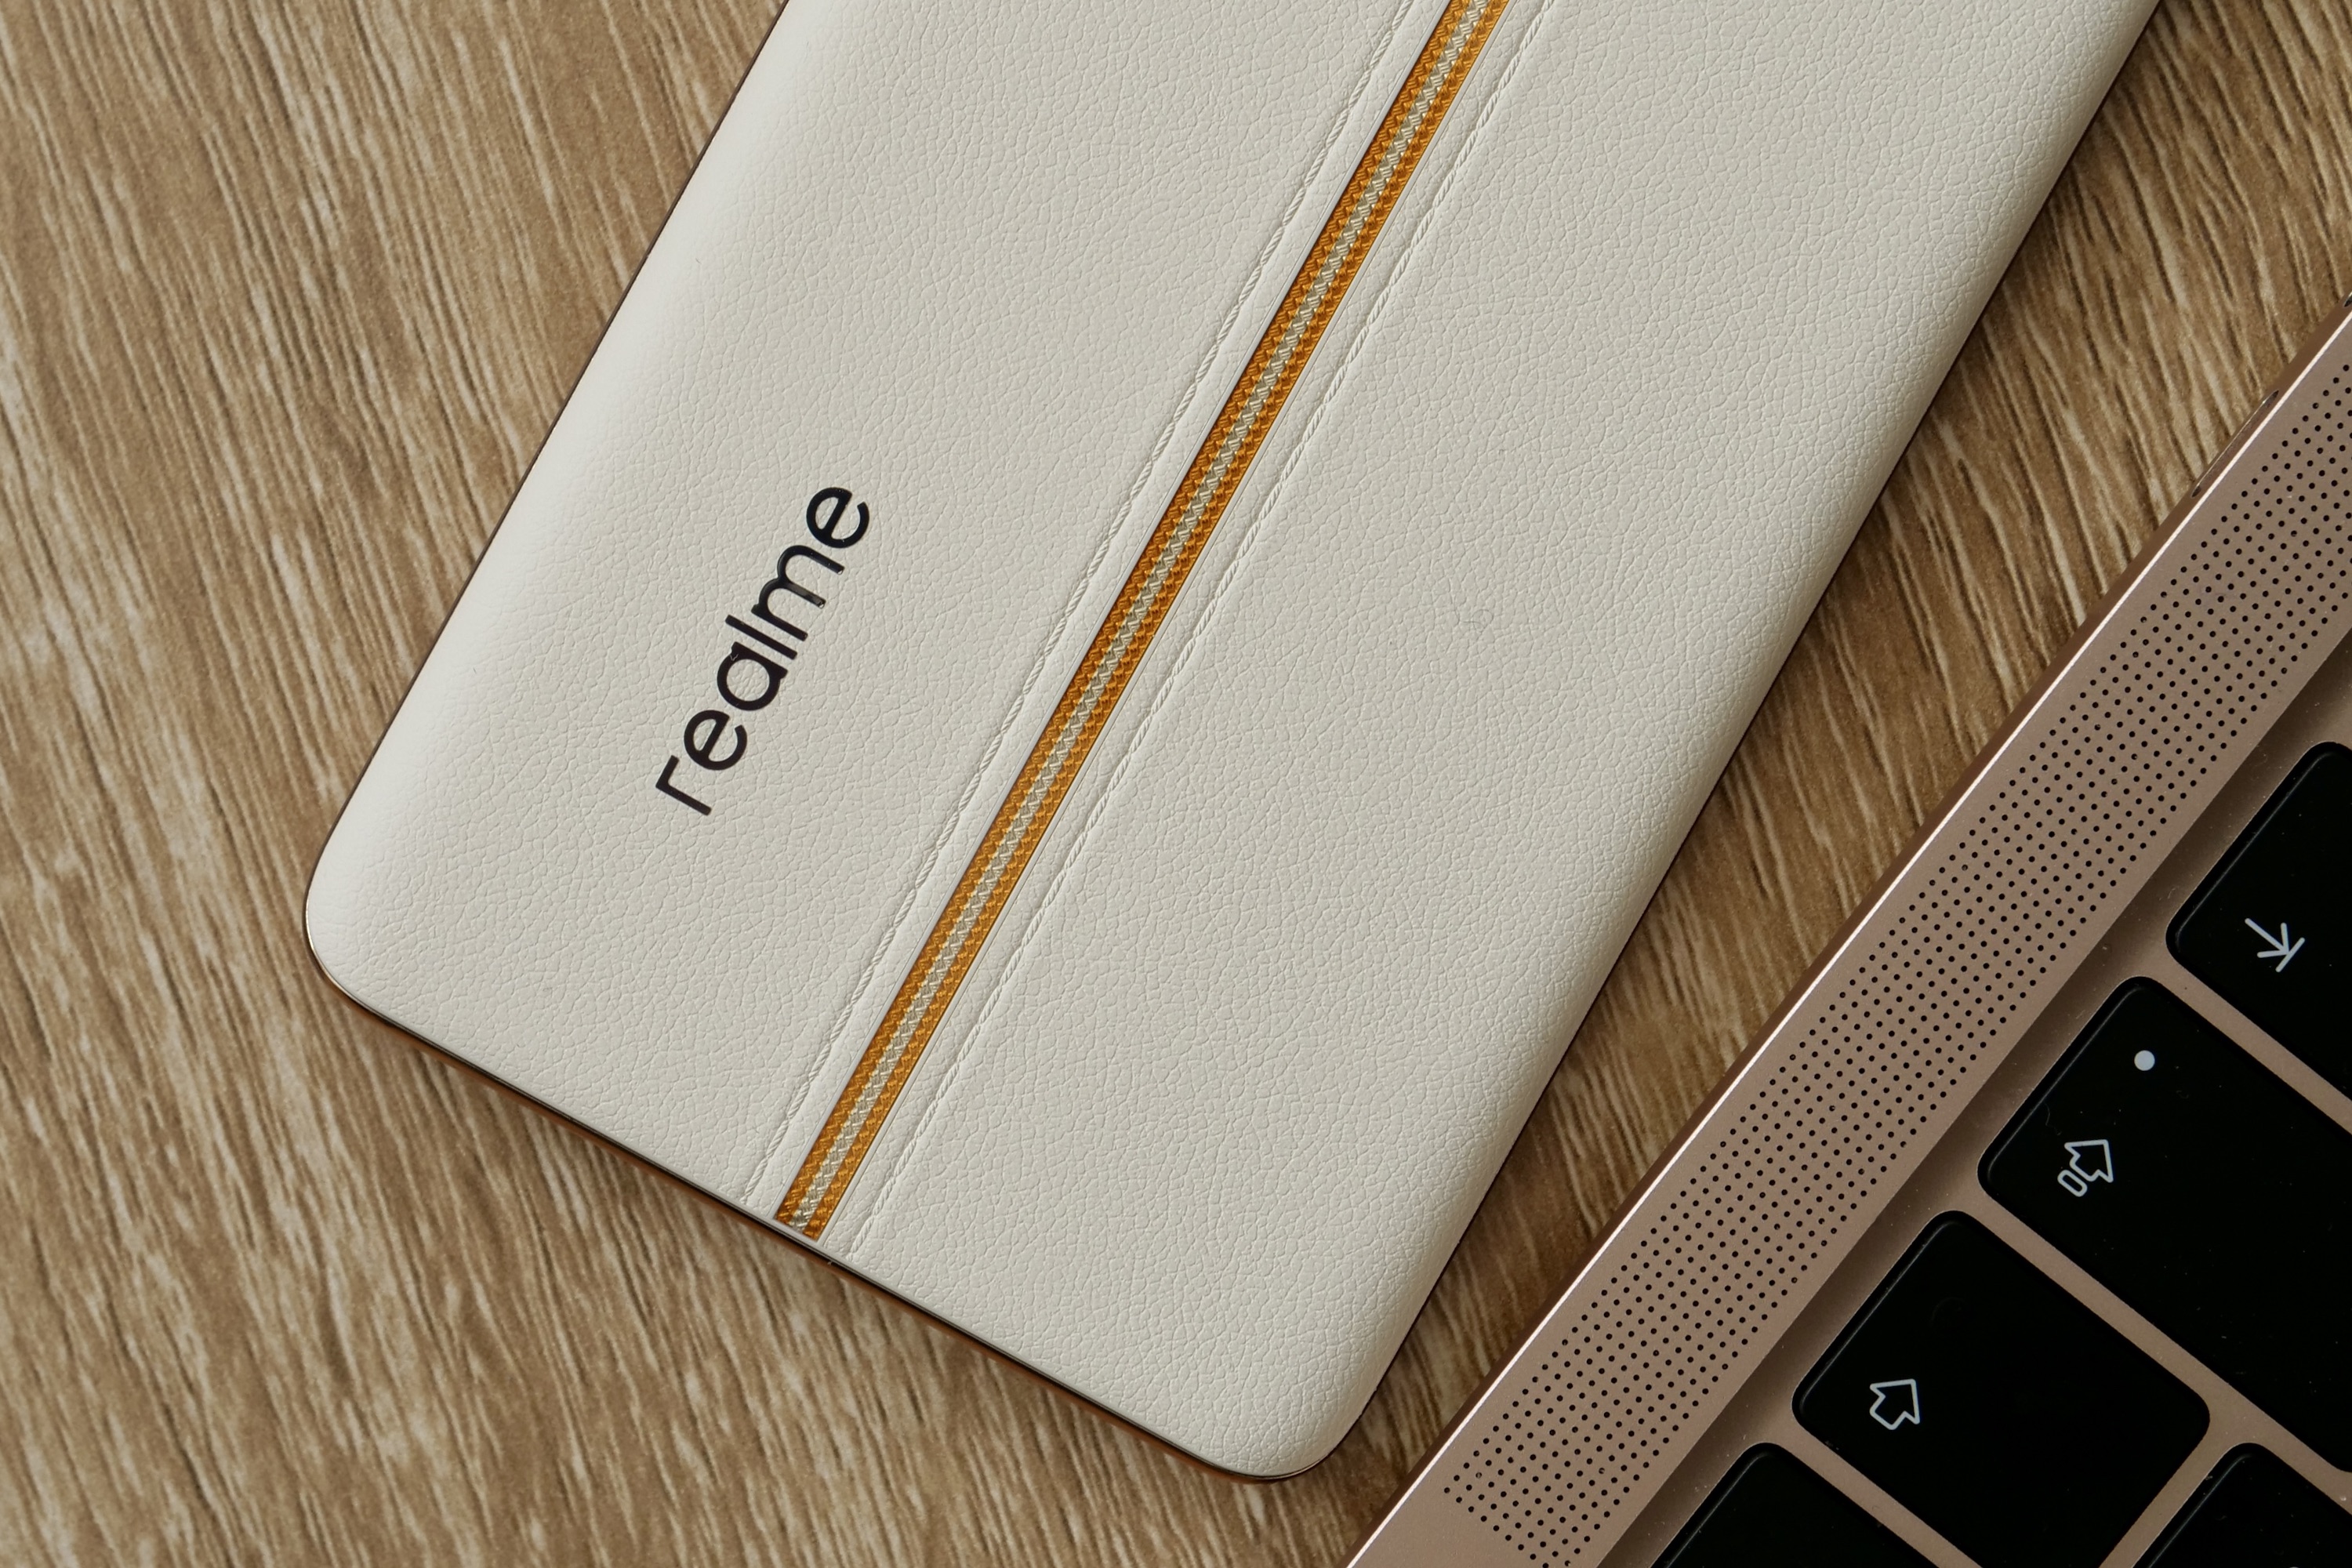 The Realme logo and fake leather rear panel on the Realme 11 Pro+.